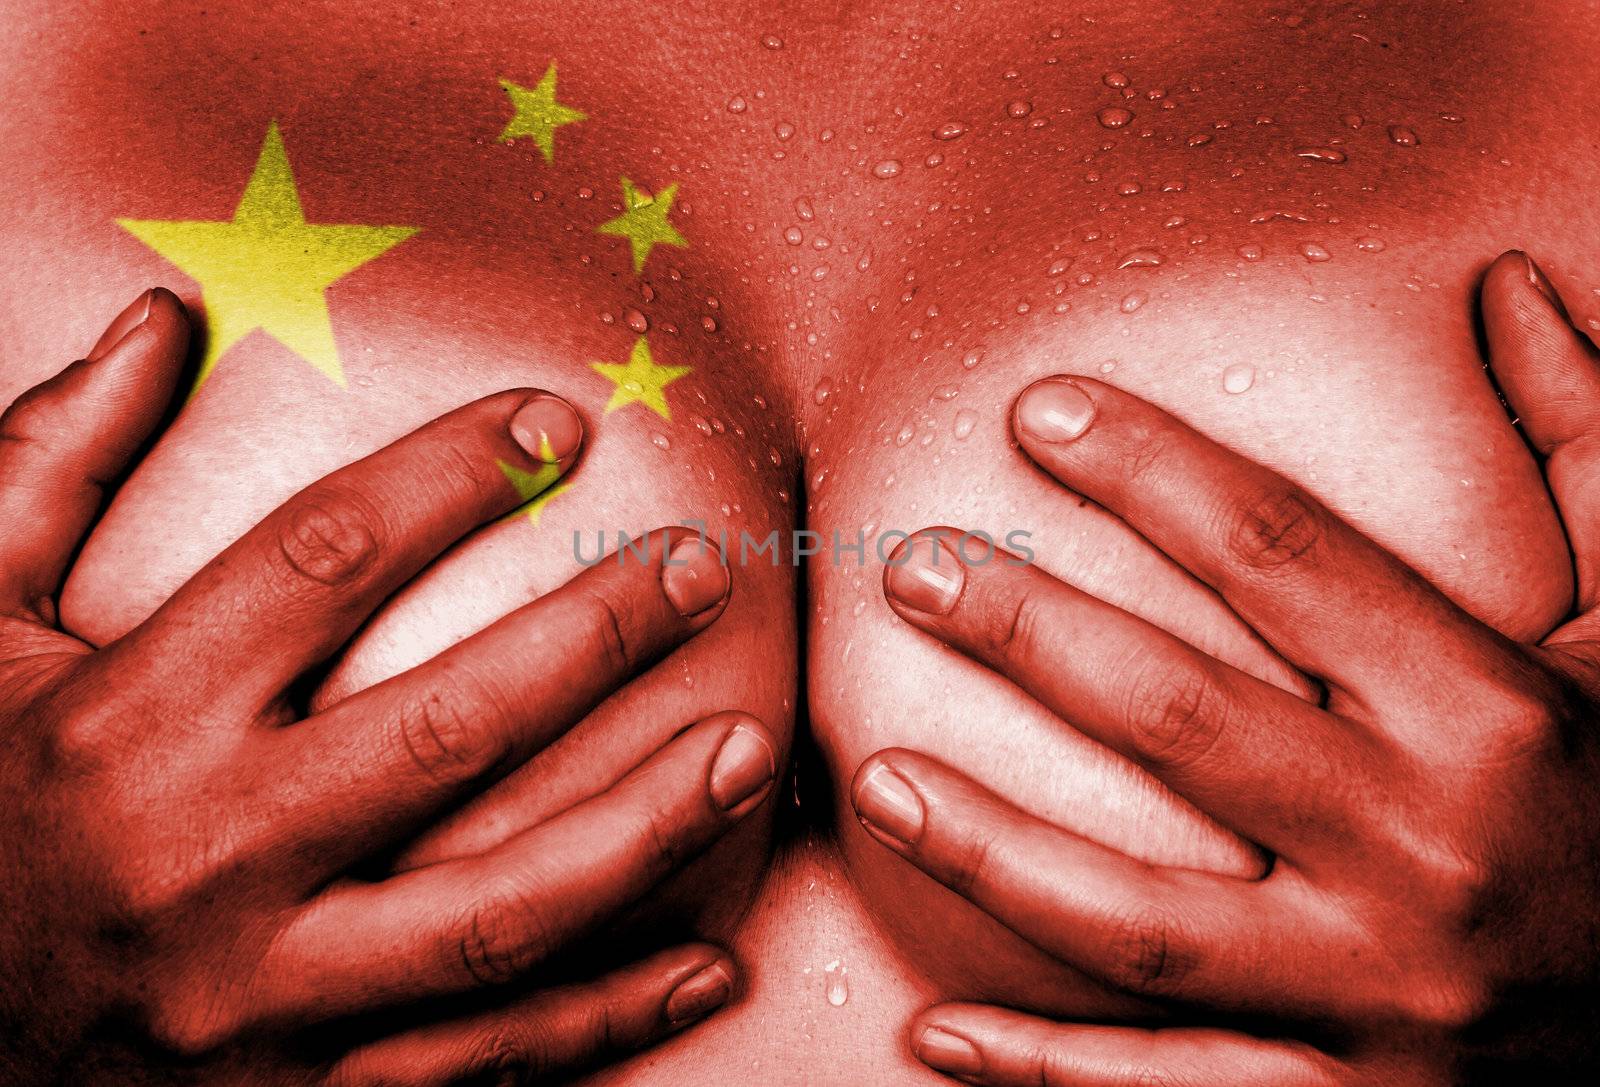 Sweaty upper part of female body, hands covering breasts, flag of China